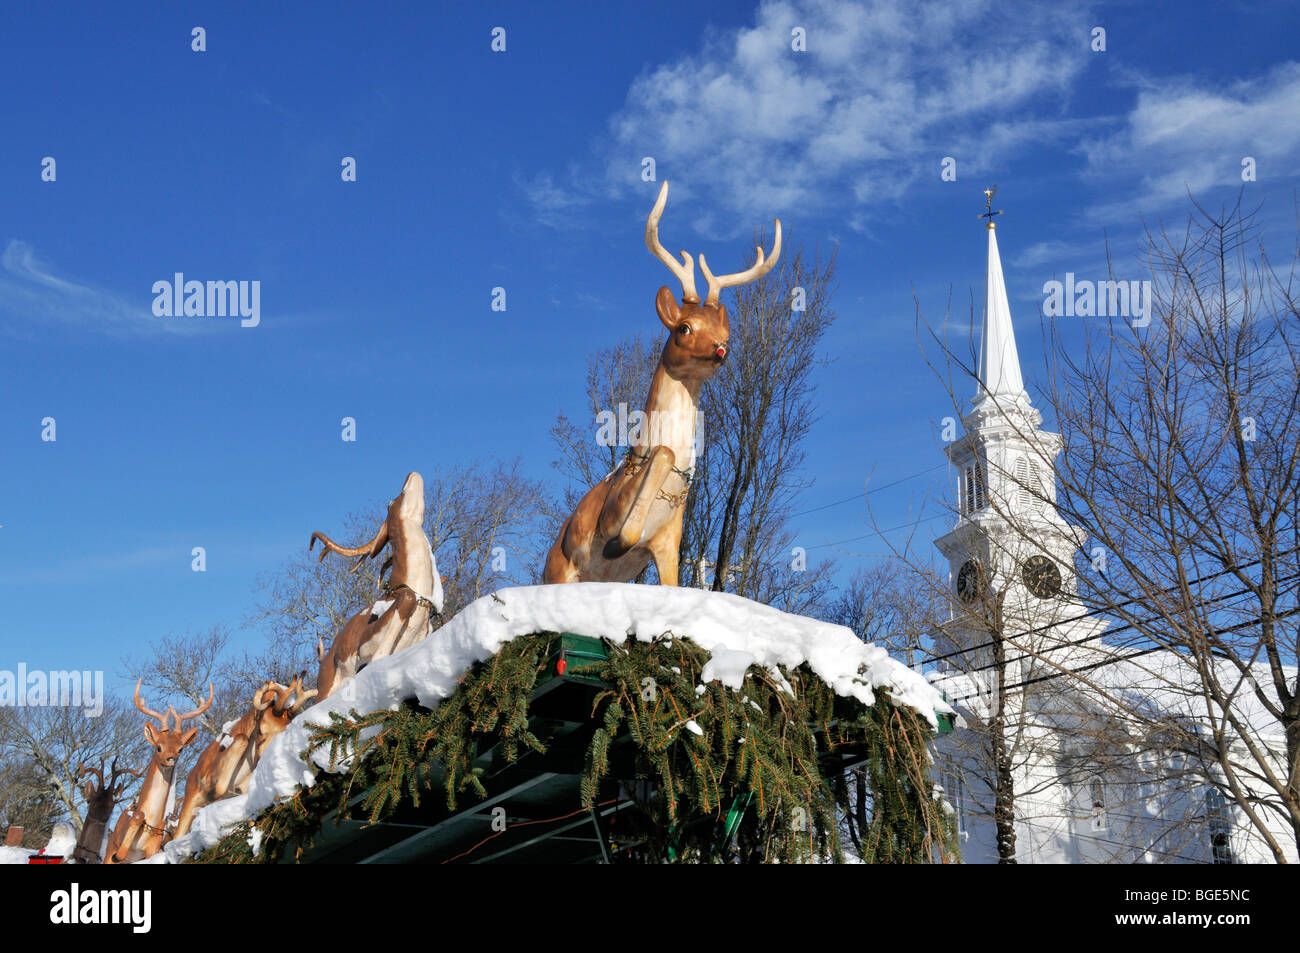 Rudolph the red nosed reindeer Christmas display outdoors with snow and church steeple Stock Photo